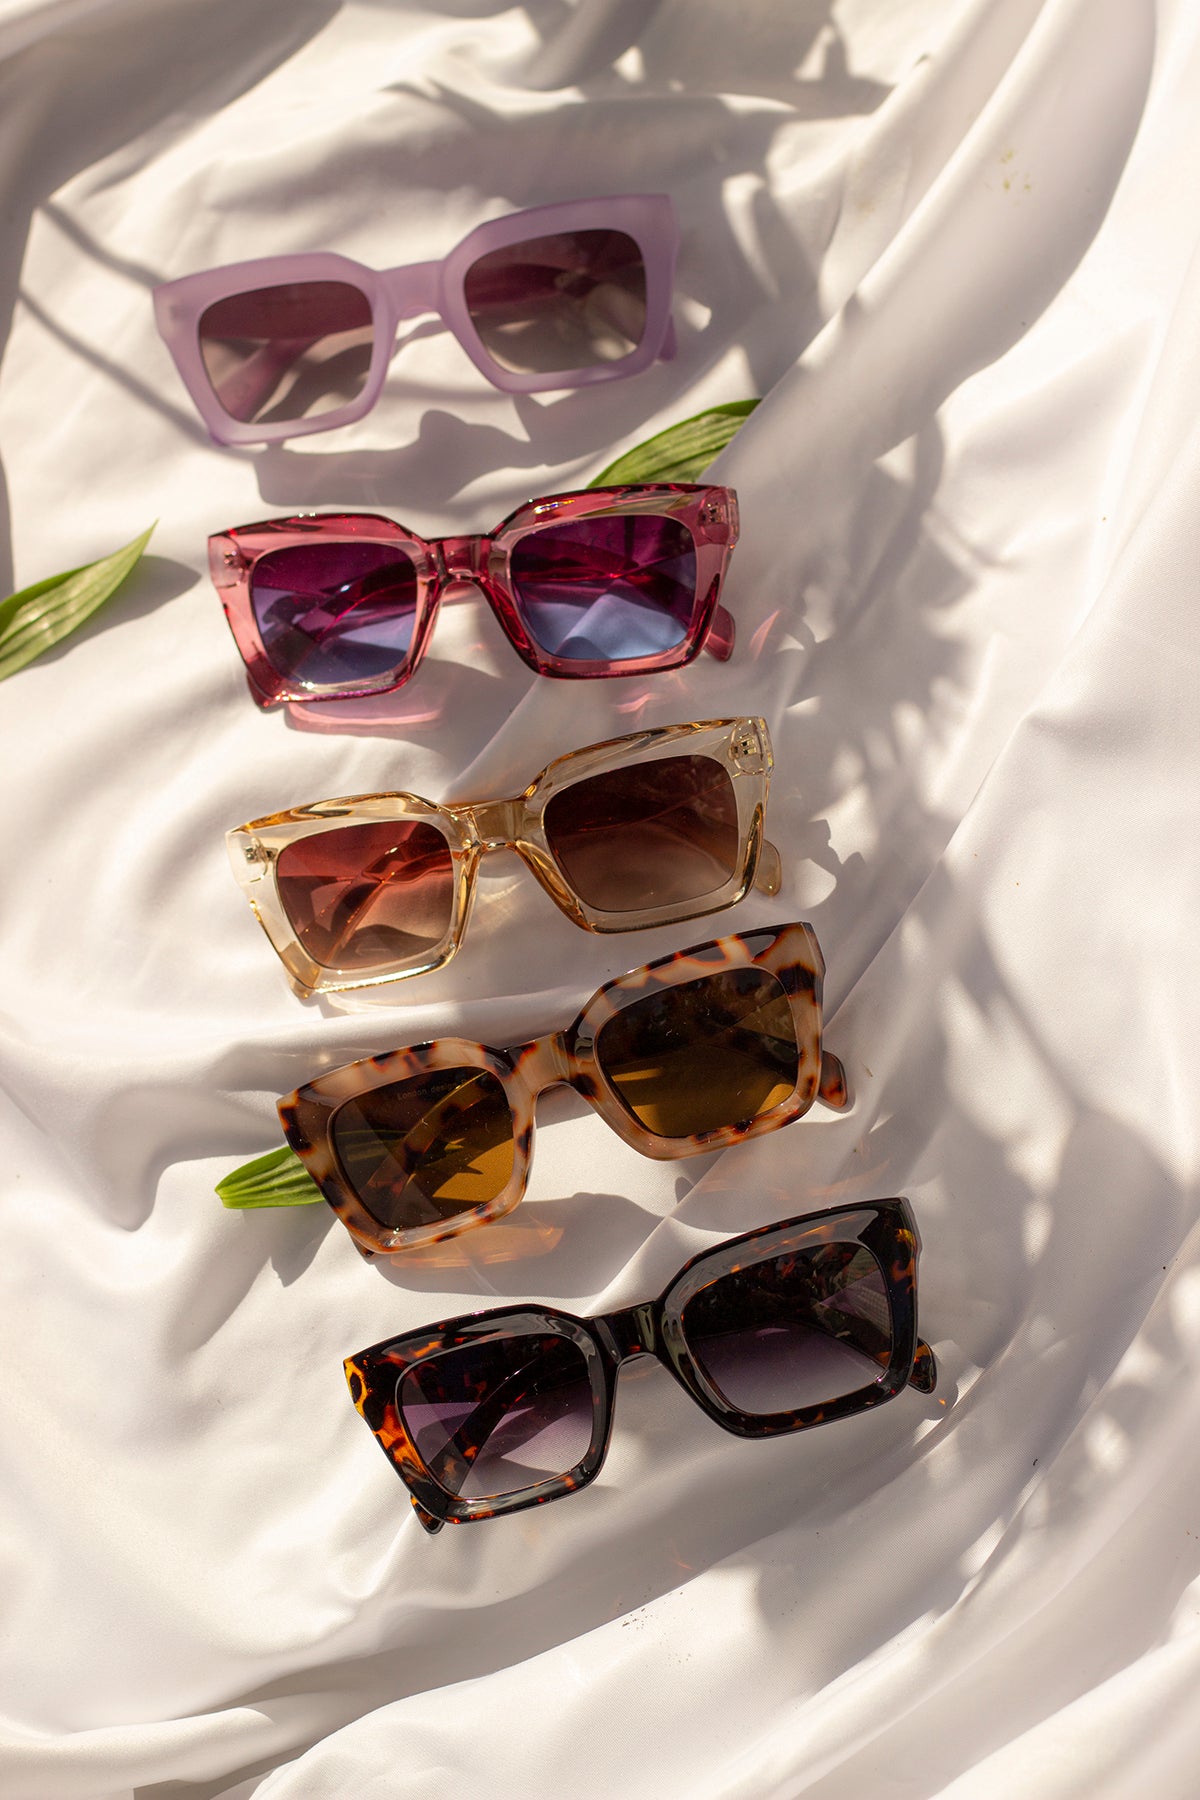 Chunky Bevelled Square Sunglasses - Sugar + Style